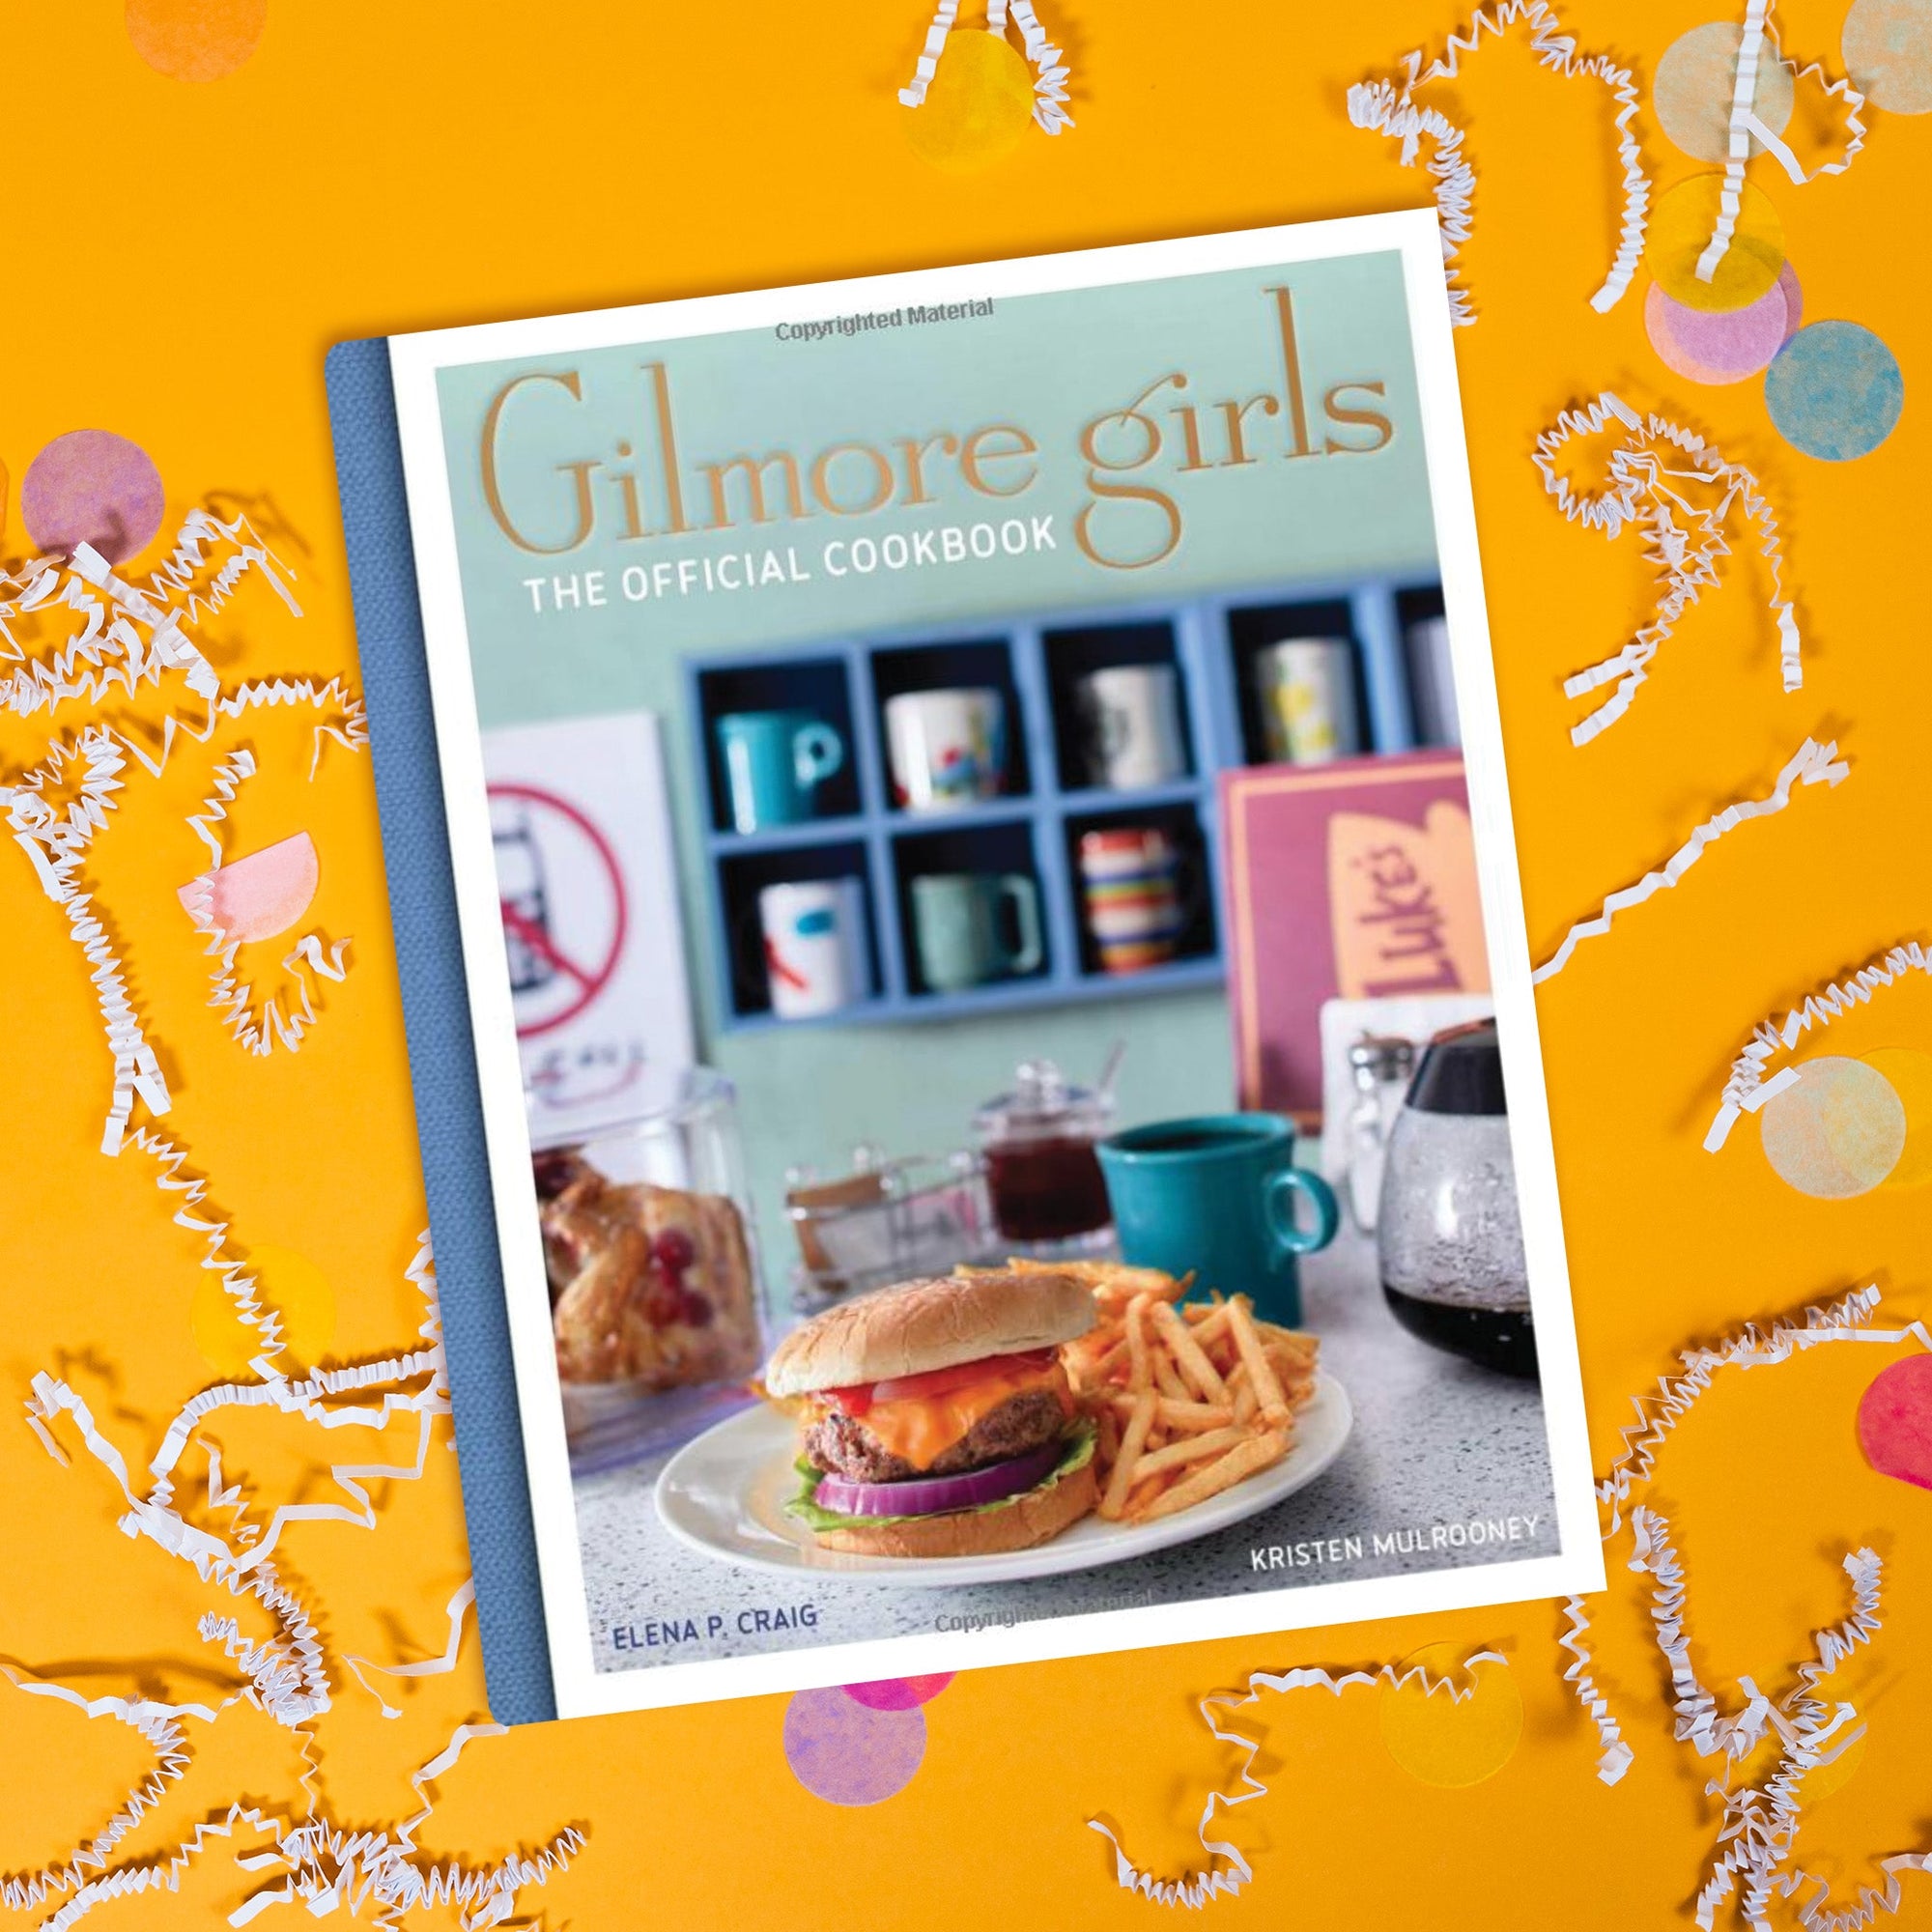 On a sunny mustard background sits a book. This Gilmore Girls inspired cookbook says in gold serif font "Gilmore girls" and in all caps, white block font "The Official Cookbook." It has a picture of a diner in the background with a plate of hamburger and fries, with coffee and mugs.